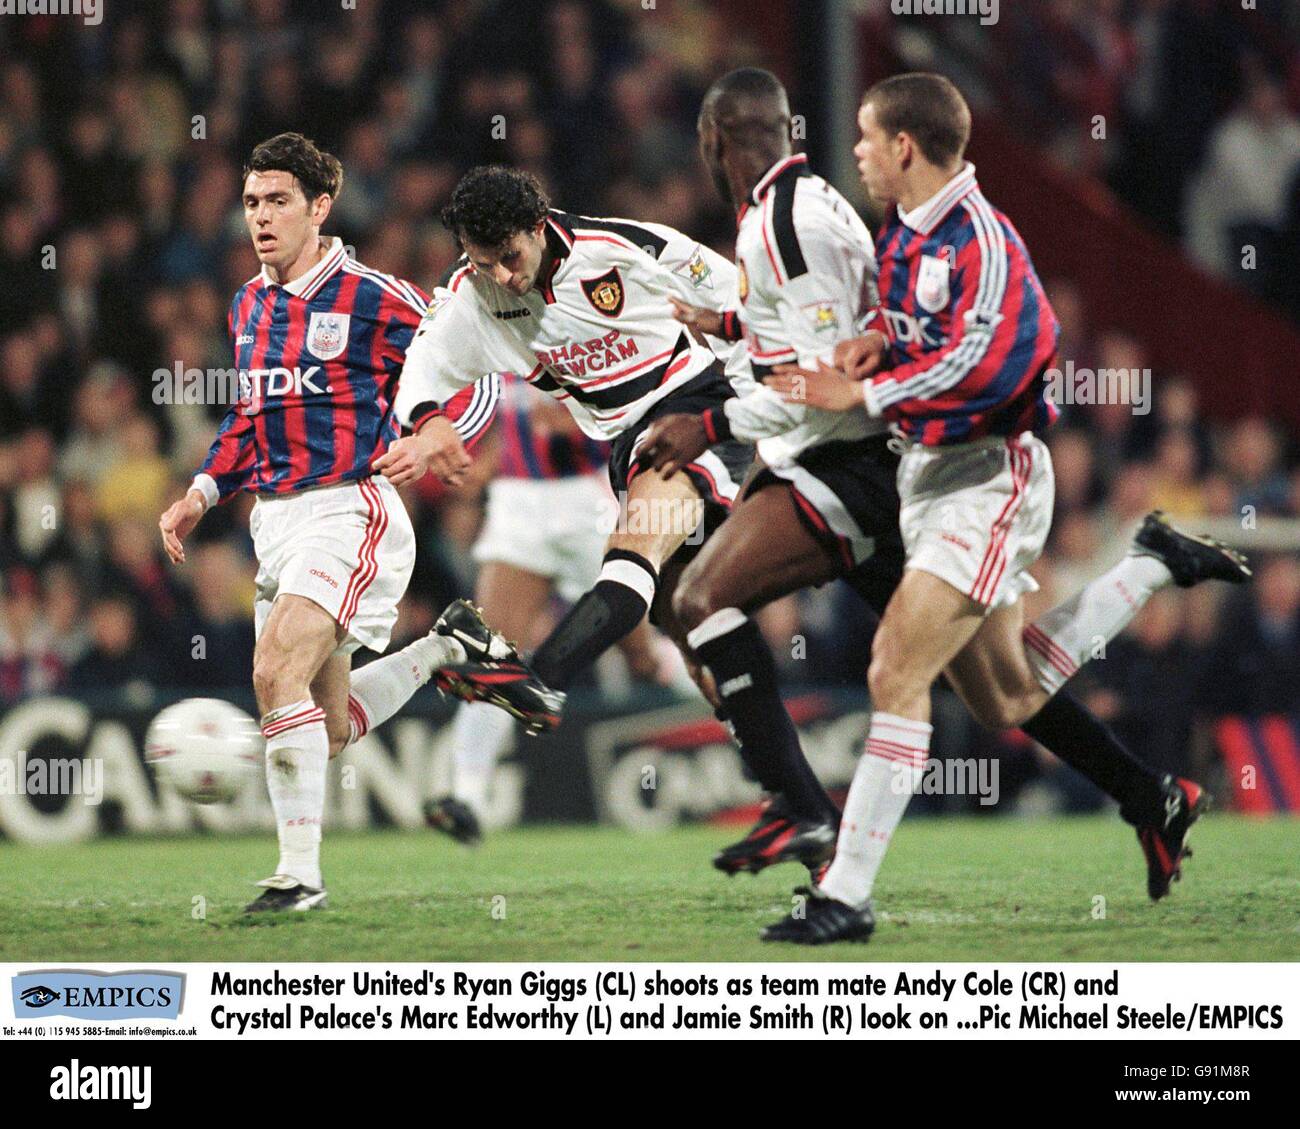 Manchester United's Ryan Giggs (CL) shoots as team mate Andy Cole (CR) and Crystal Palace's Marc Edworthy (L) and Jamie Smith (R) look on Stock Photo